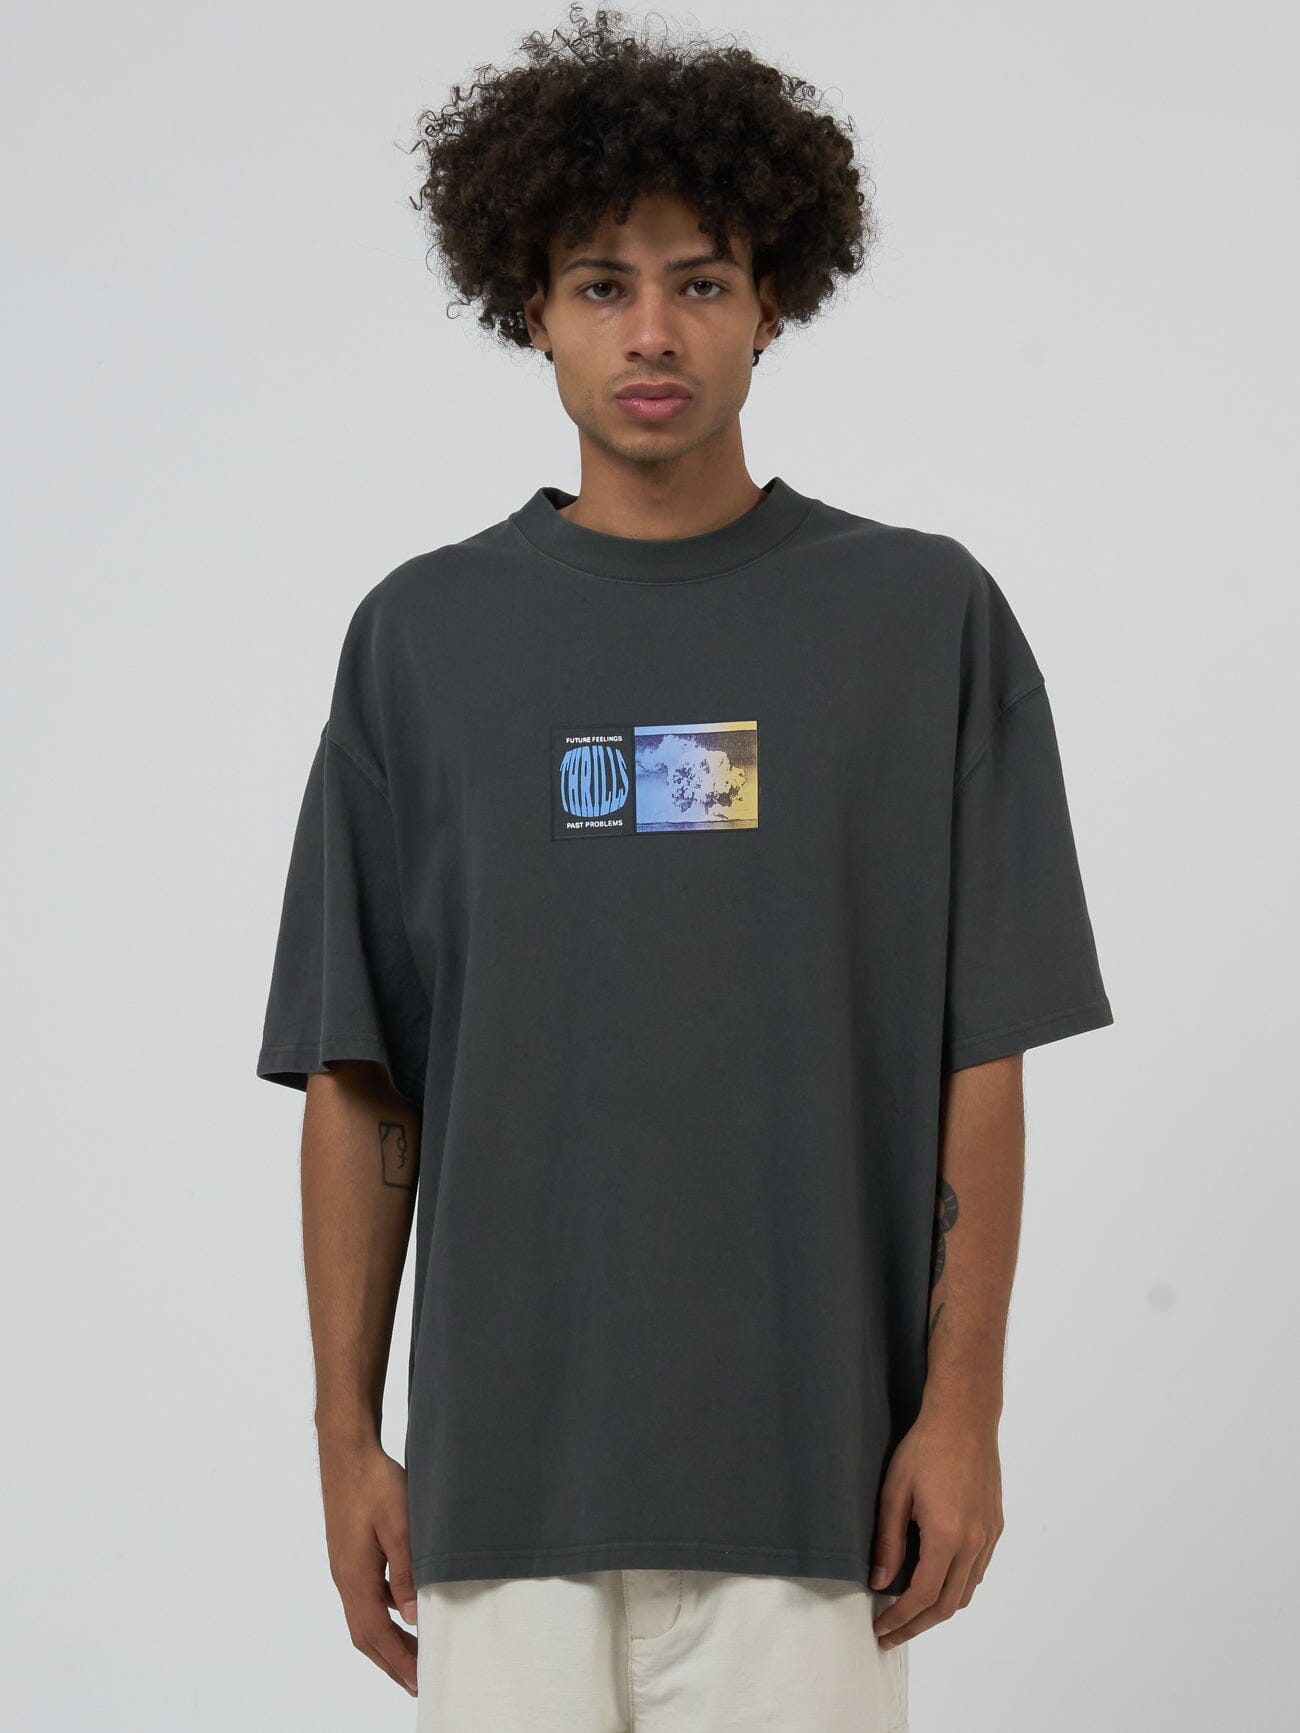 Actions Not Words Box Fit Oversize Tee - Merch Black